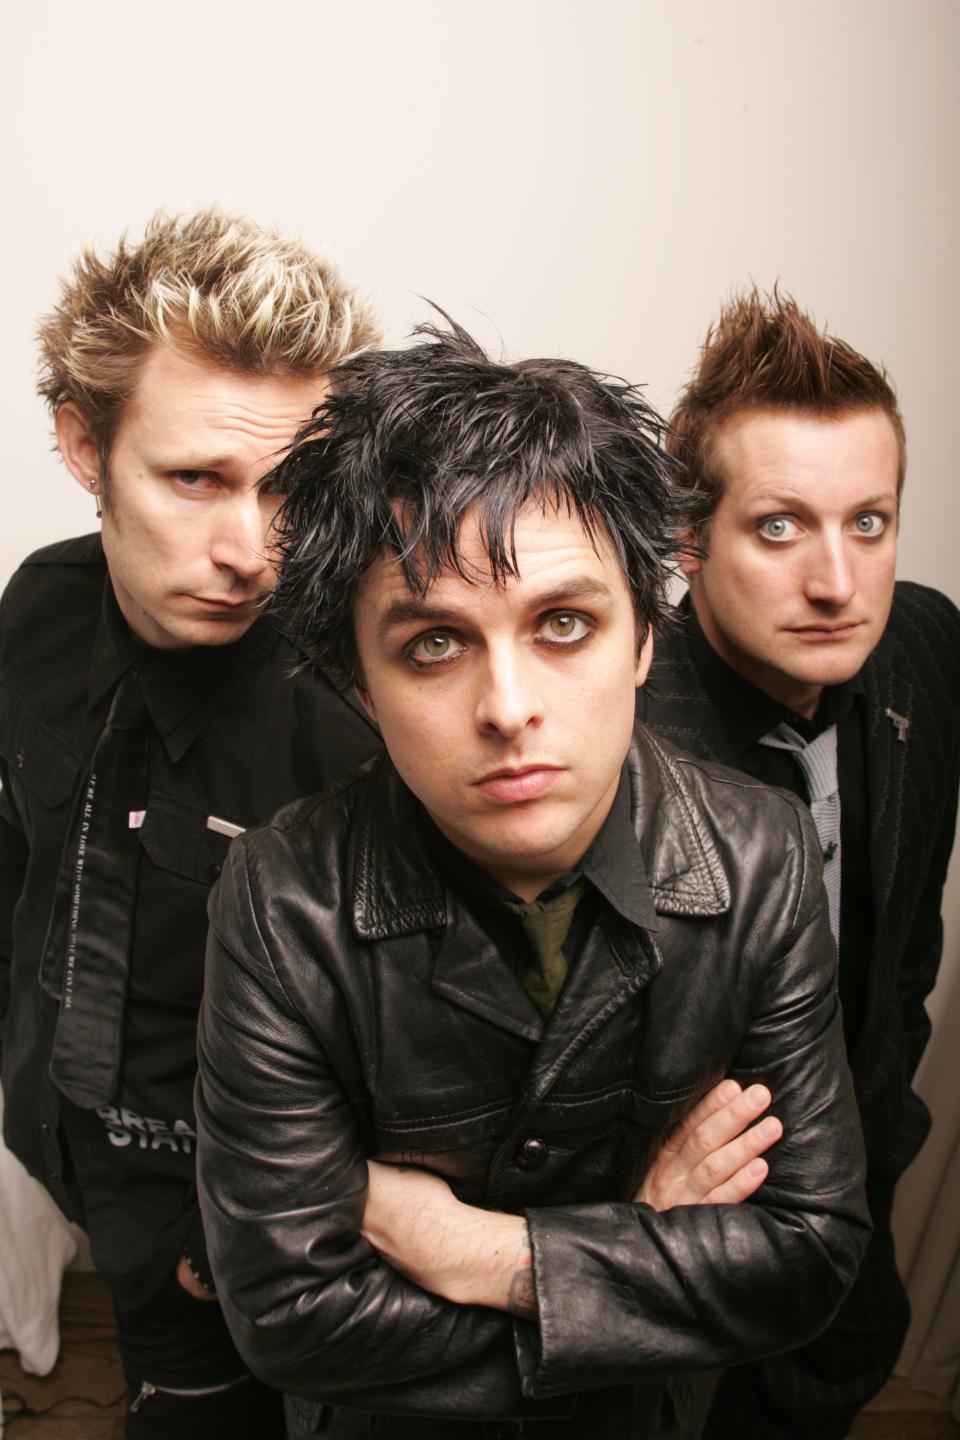 Green Day's Mike Dirnt, Billie Joe Armstrong and Tre Cool pose for a portrait in New York City on the eve of a European tour in 2015.